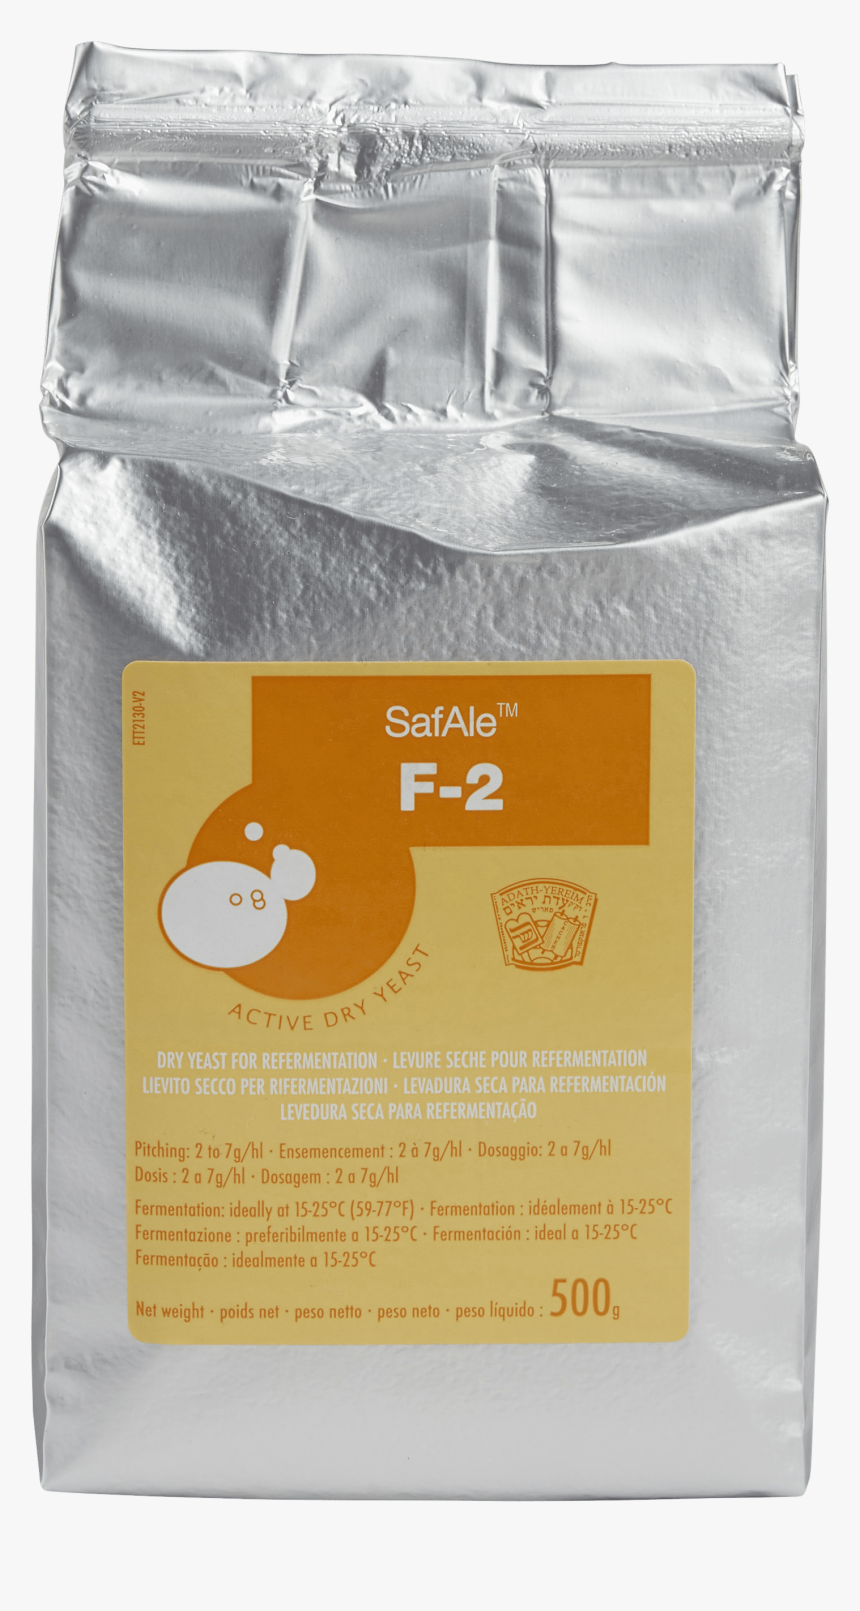 Safalef2 Fermentis Yeast - Safale W 23, HD Png Download, Free Download